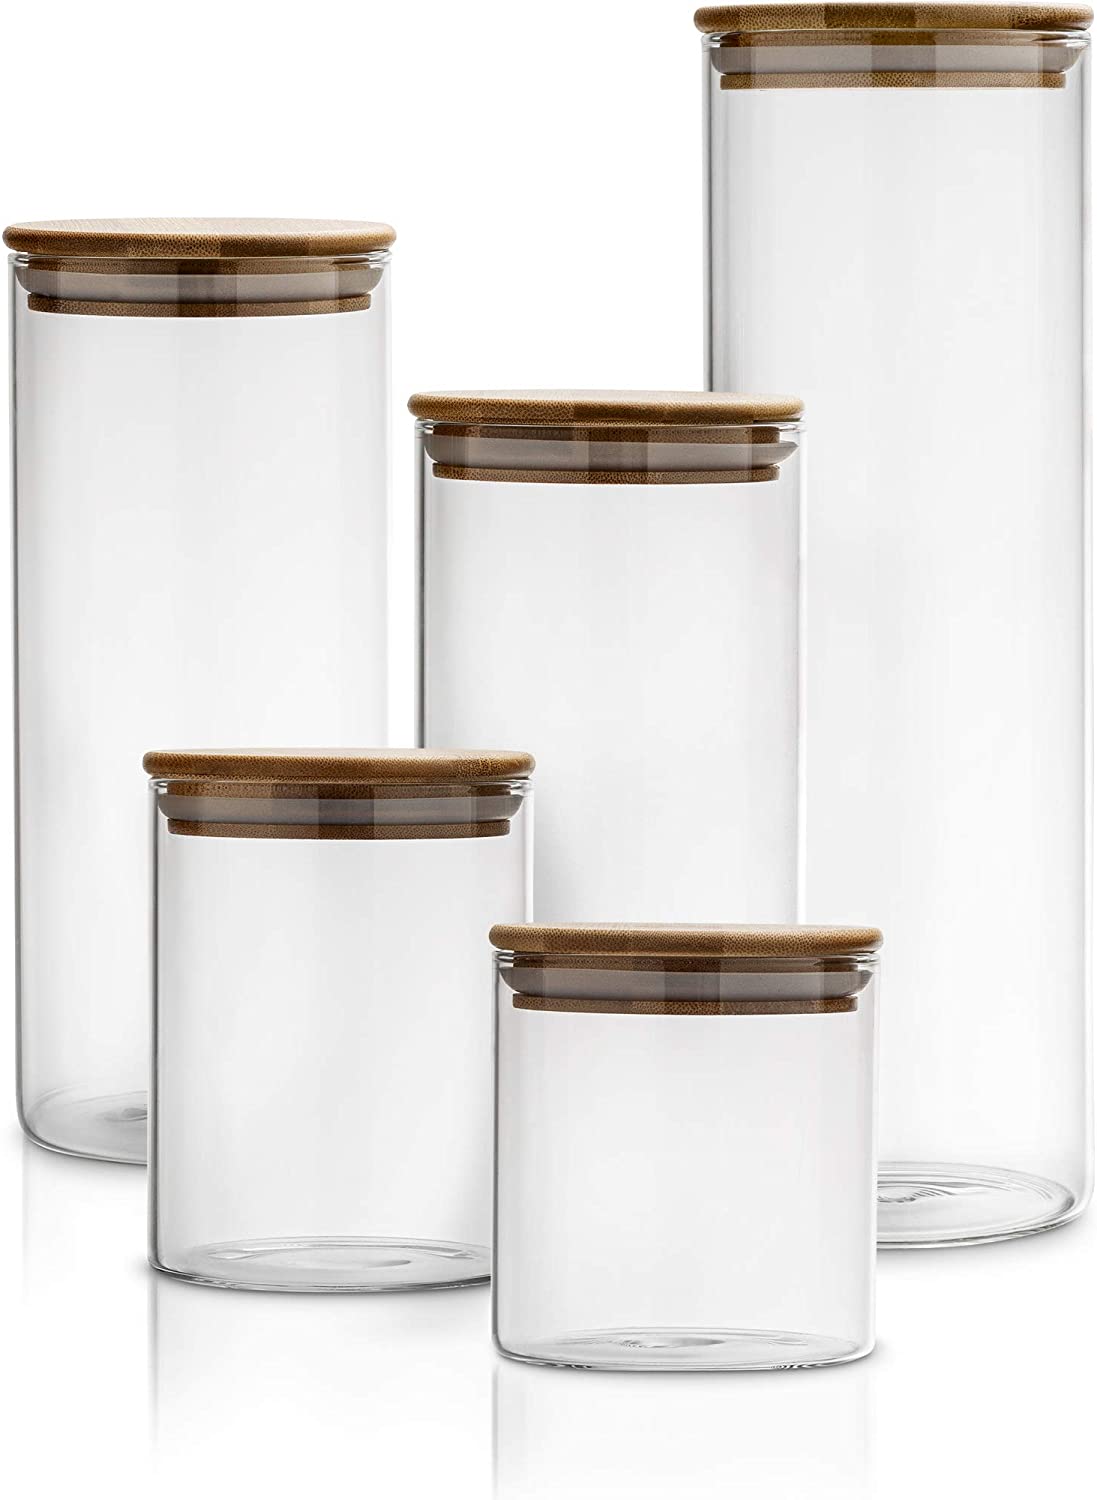 Glass Jars with Bamboo Lids, Glass food storage sets with airtight